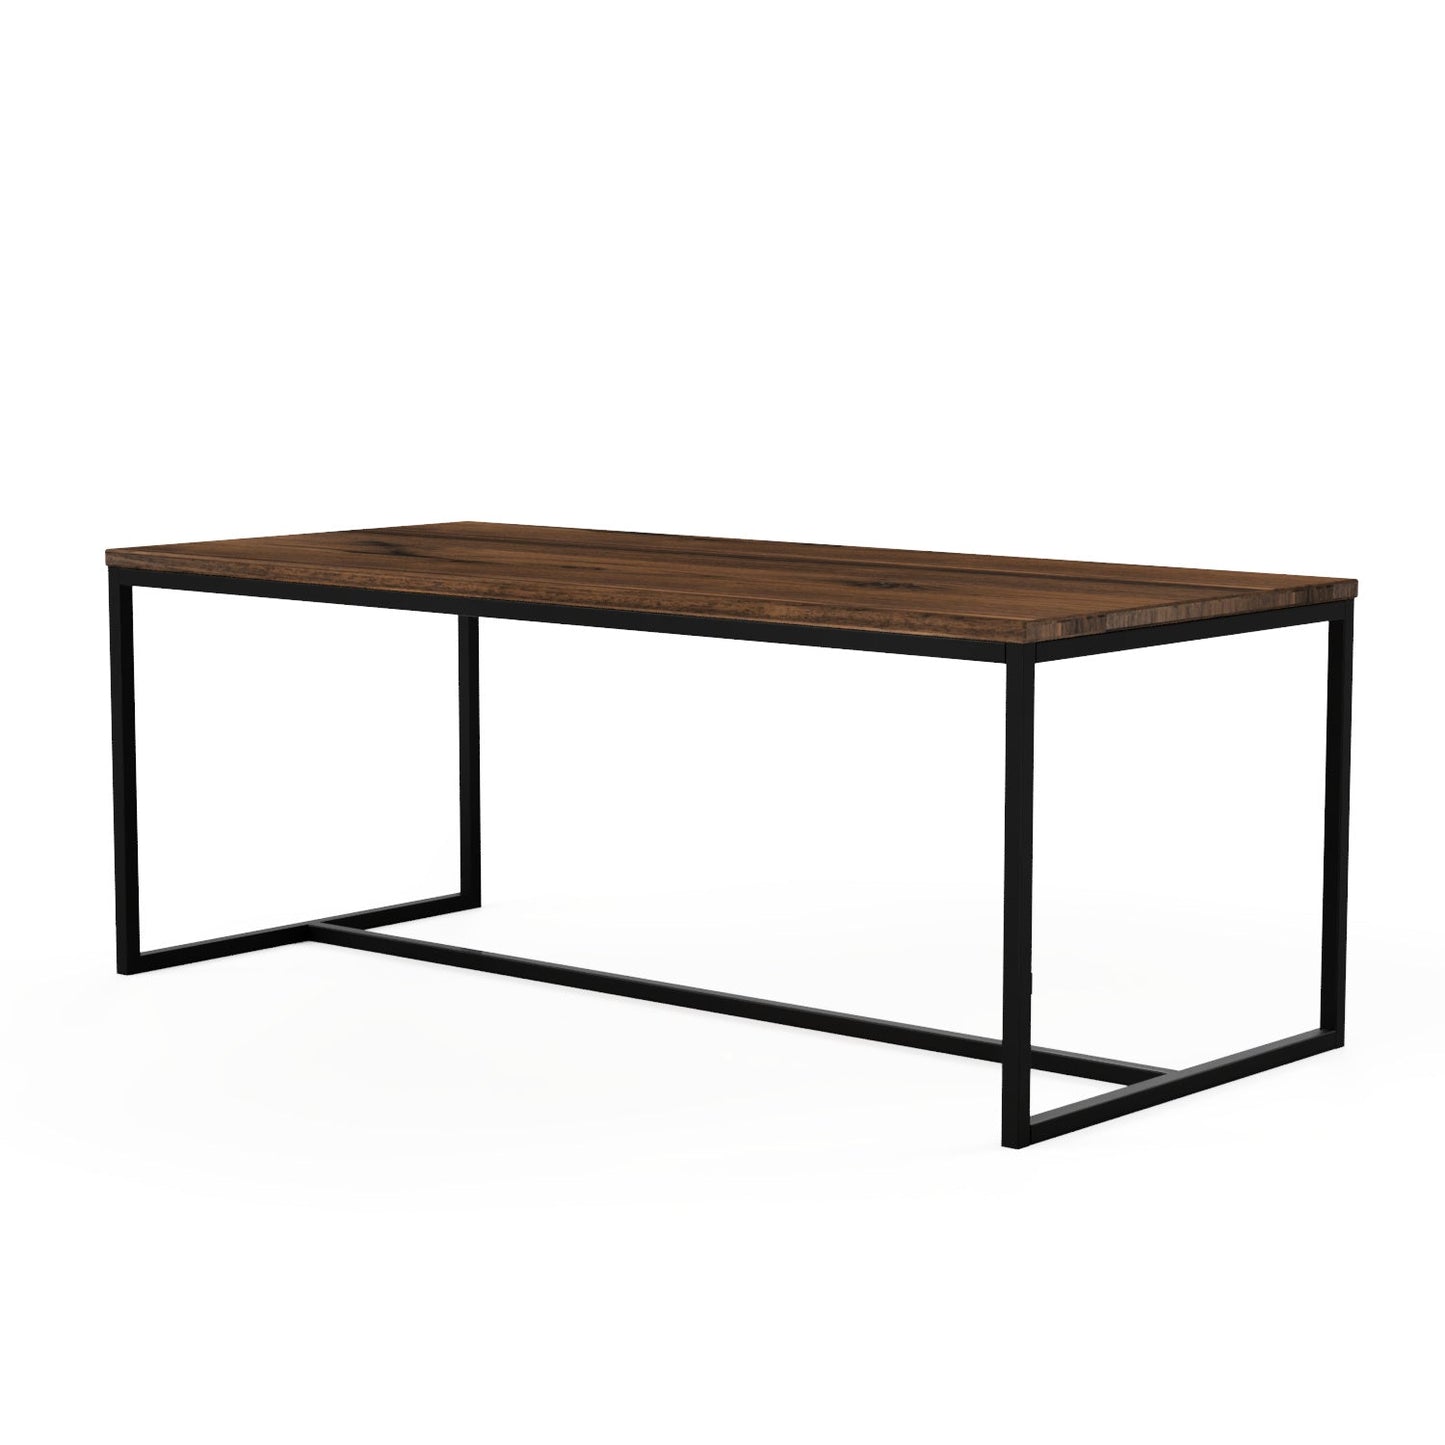 The Sedona Dining Table - FargoWoodworks